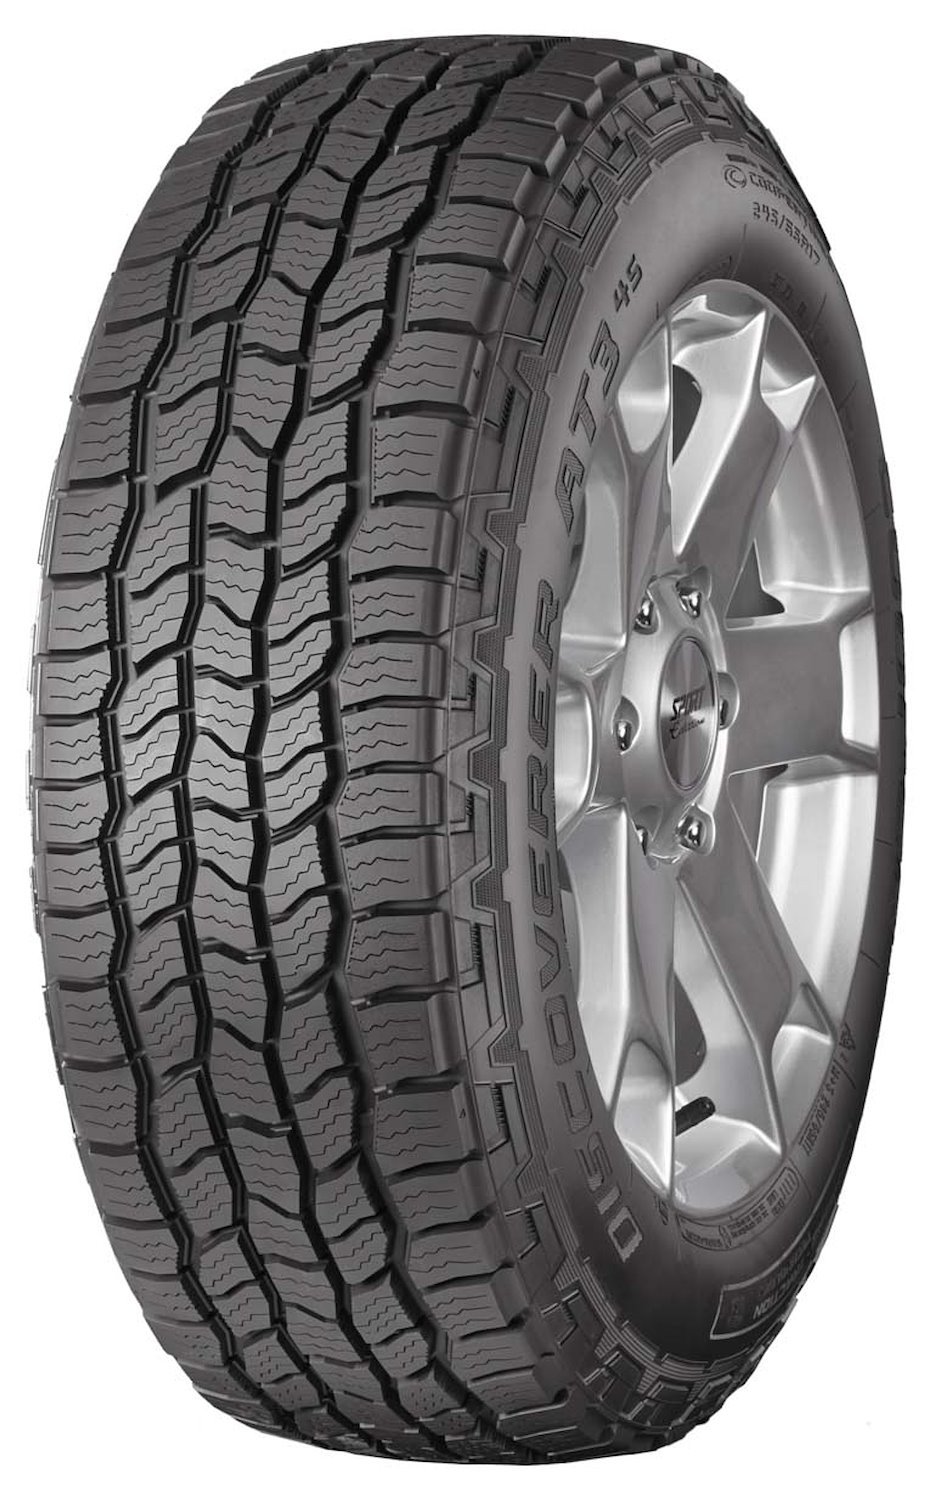 Discoverer AT3 4S All-Terrain Tire, 255/70R16